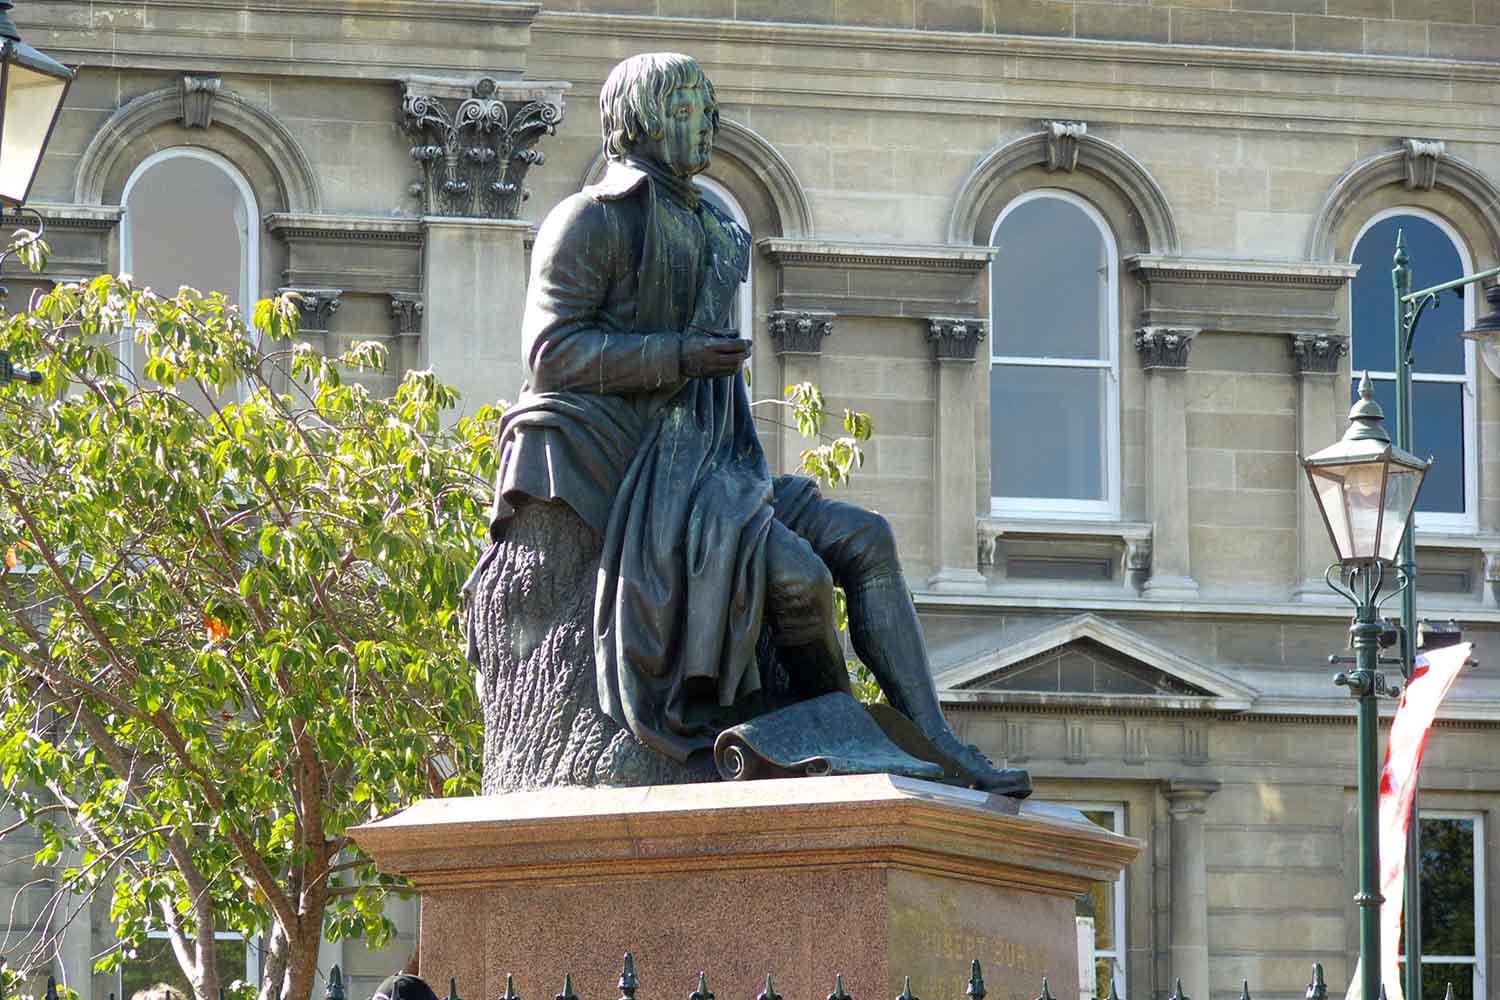 The over 100 year old statue of poet Robbie Burns sits in The Octagon